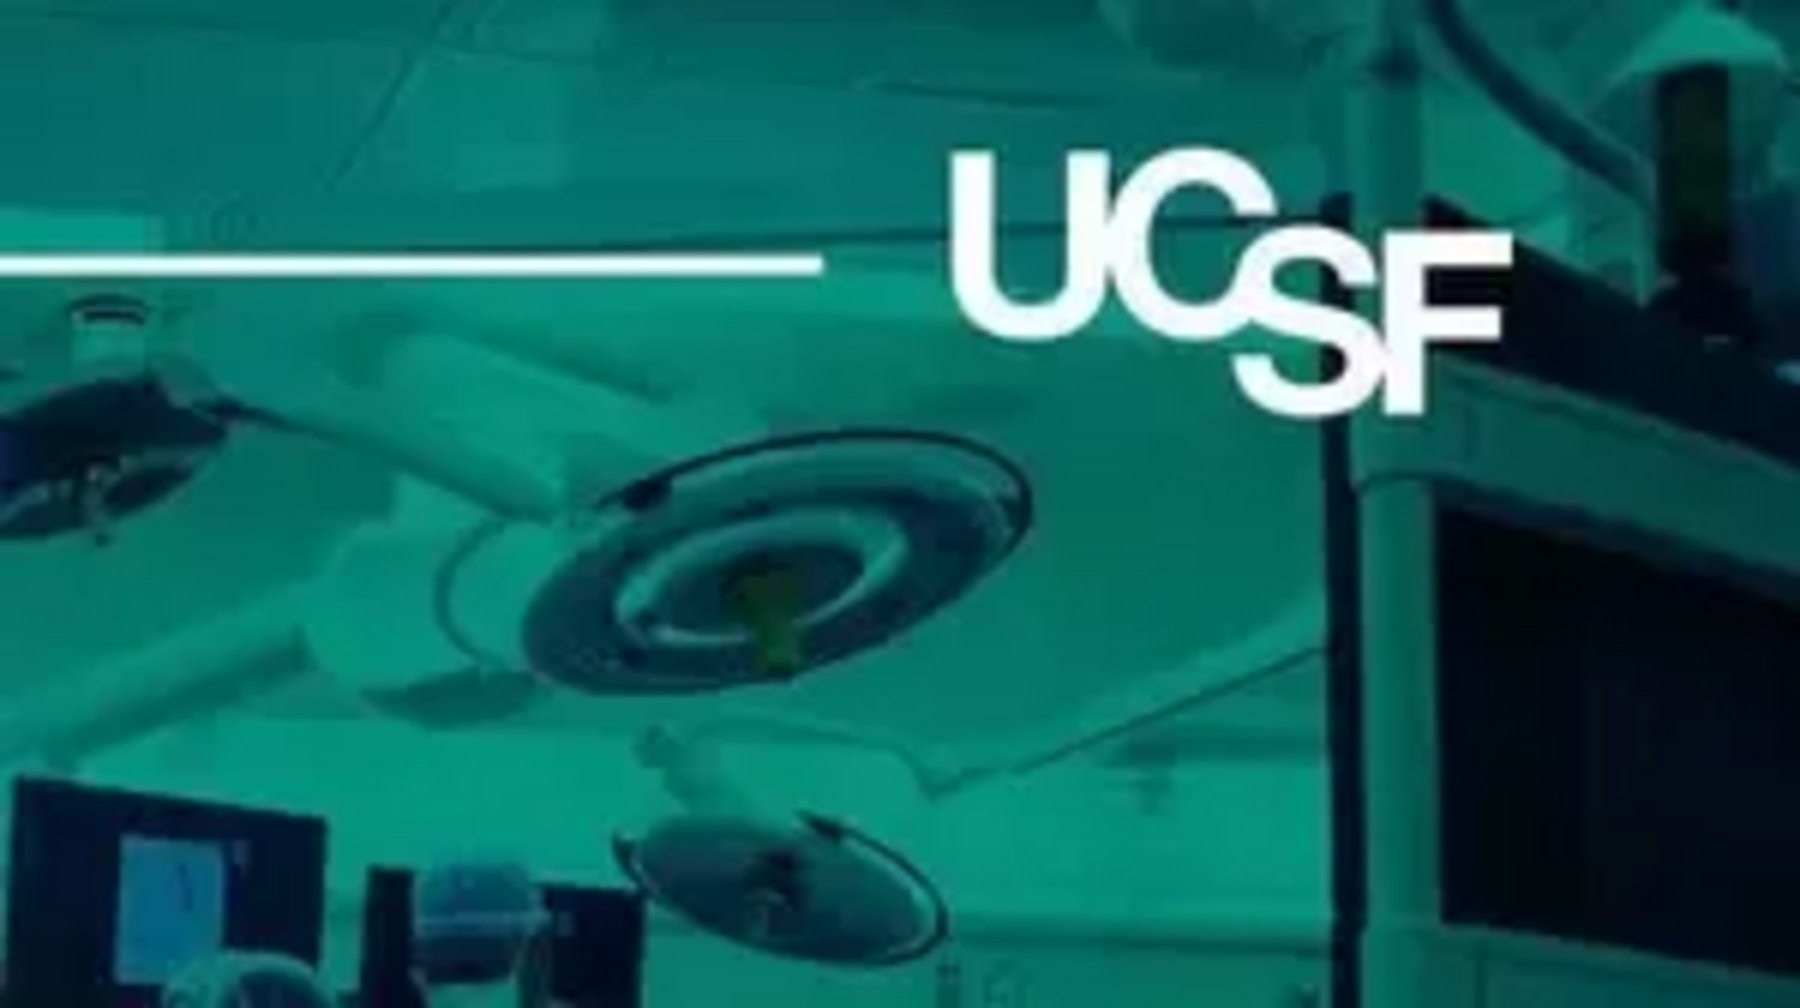 Taking a look at UCSF Health’s automated, roboticenabled supply chain